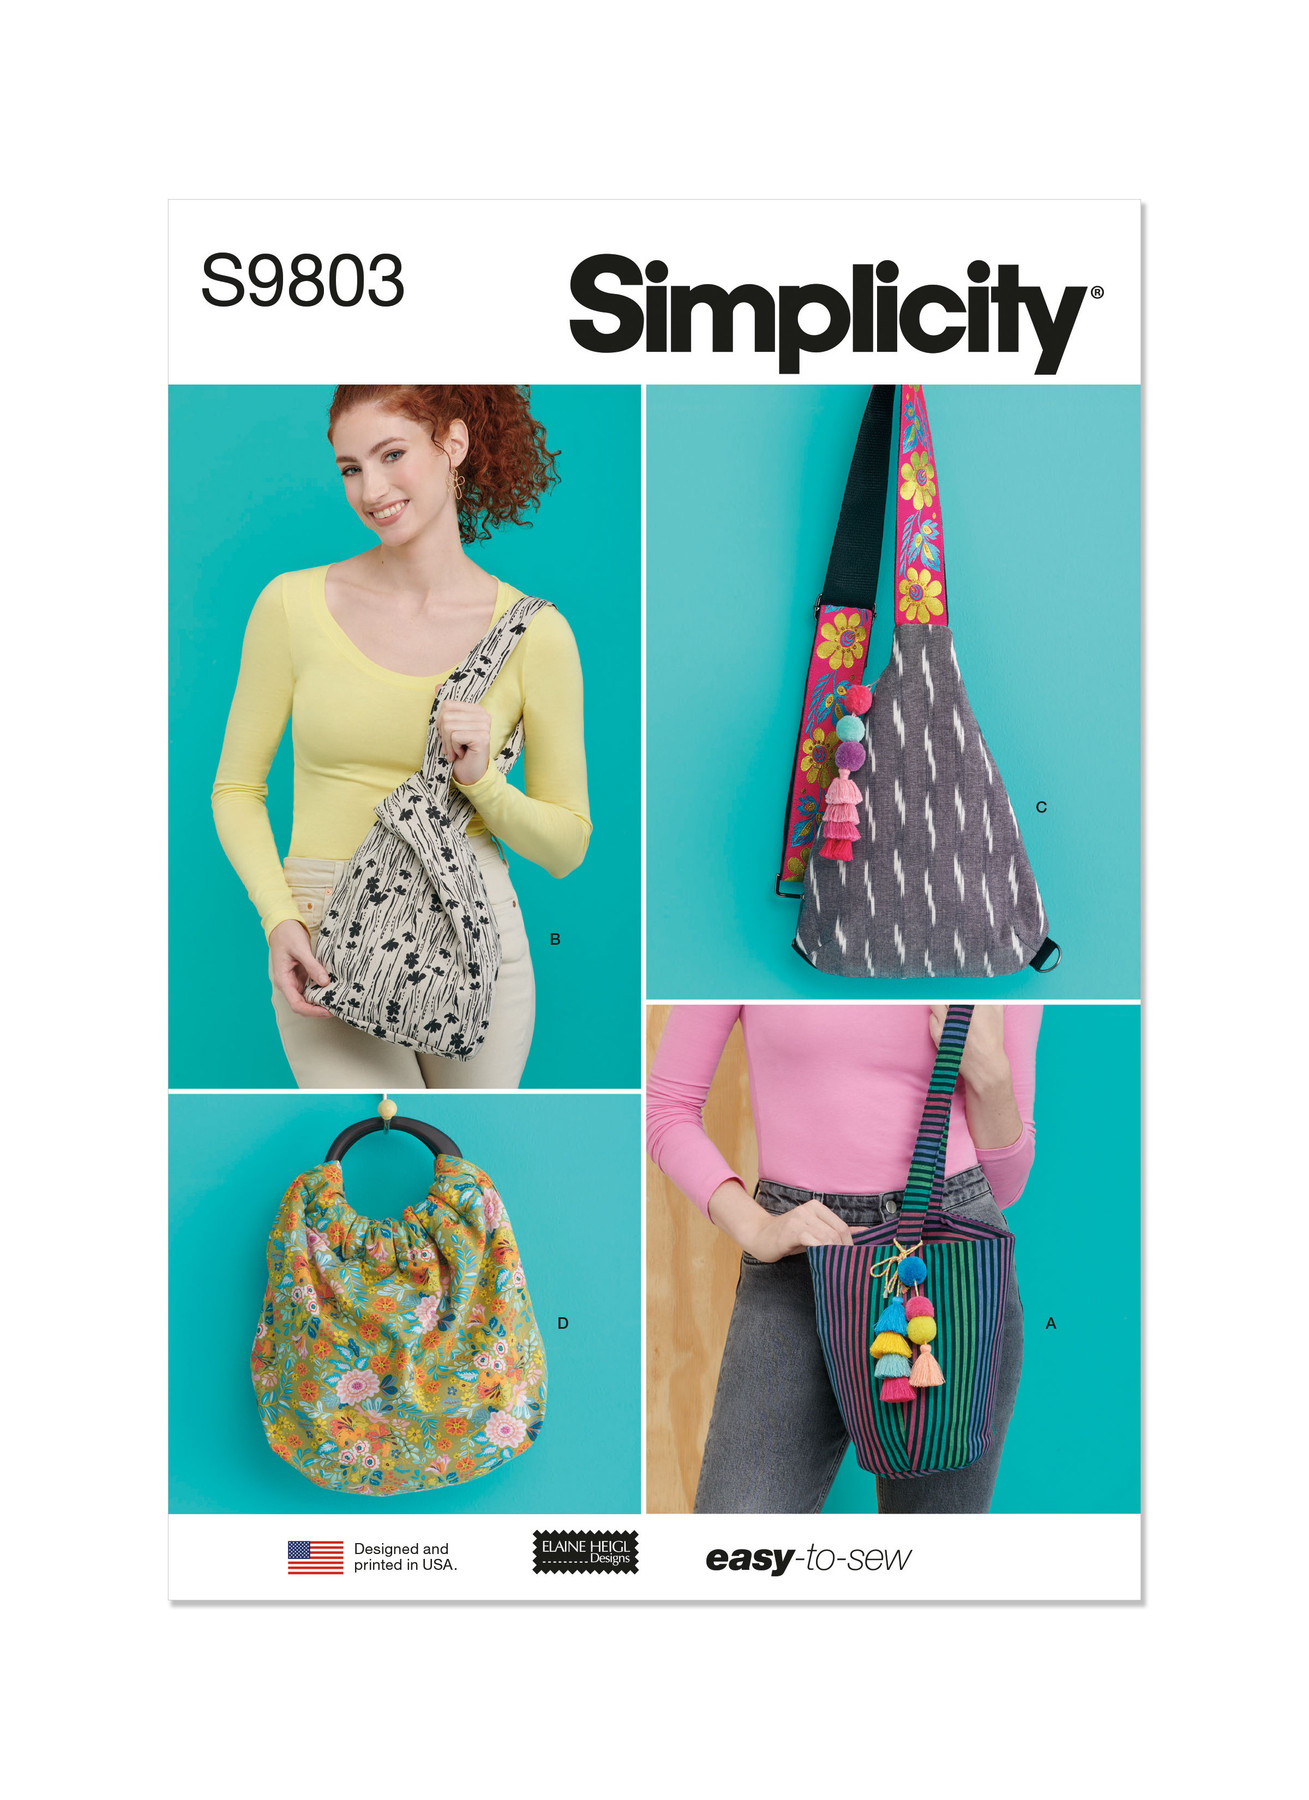 Simplicity Sewing Pattern 9803 - Bags in Four Styles by Elaine Heigl Designs, Size: OS (One Size) - image 1 of 6